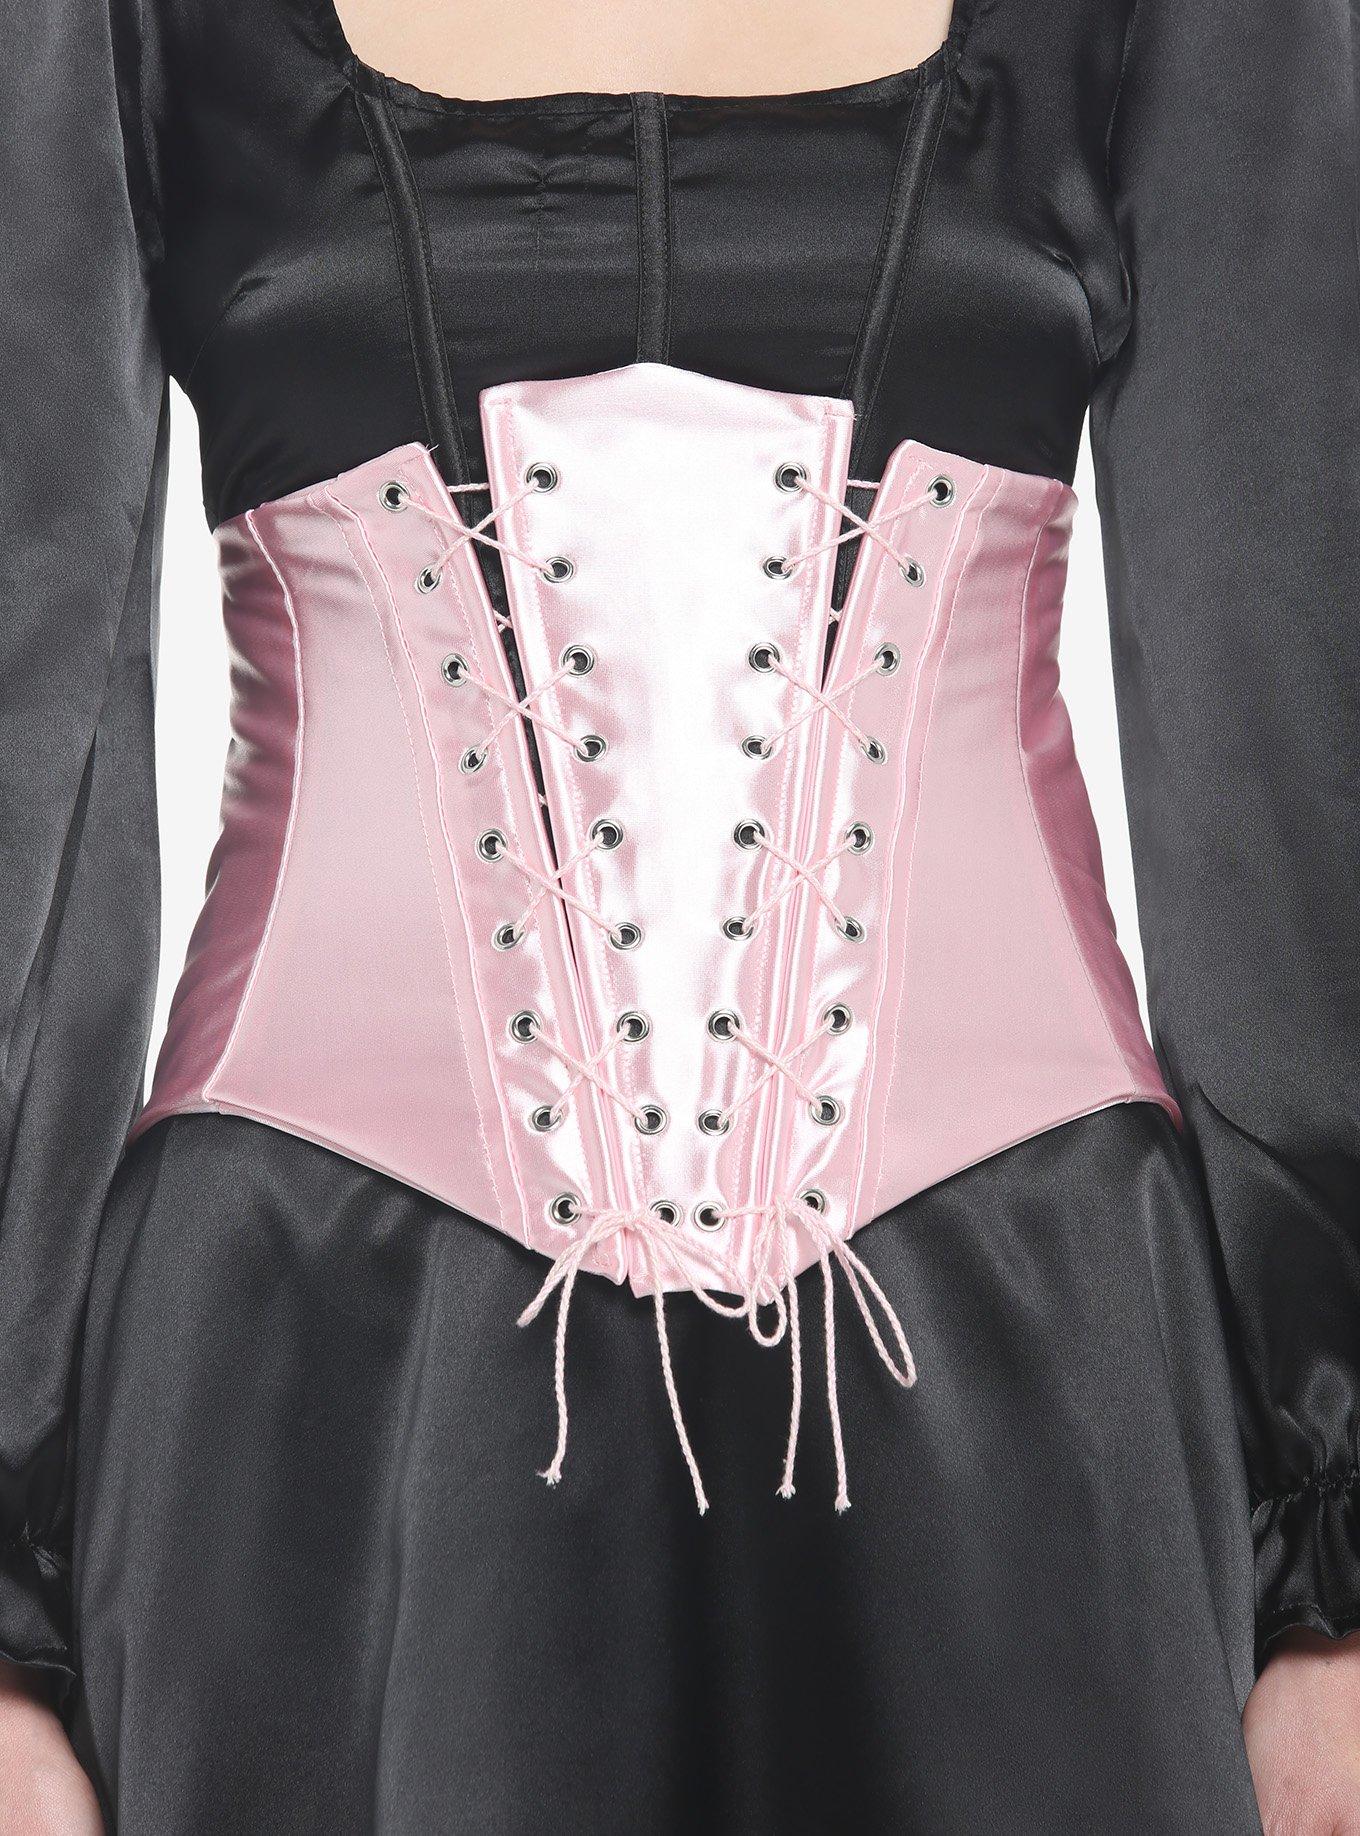 corset underbust C215 in pink satin edged with black - Boho-Chic